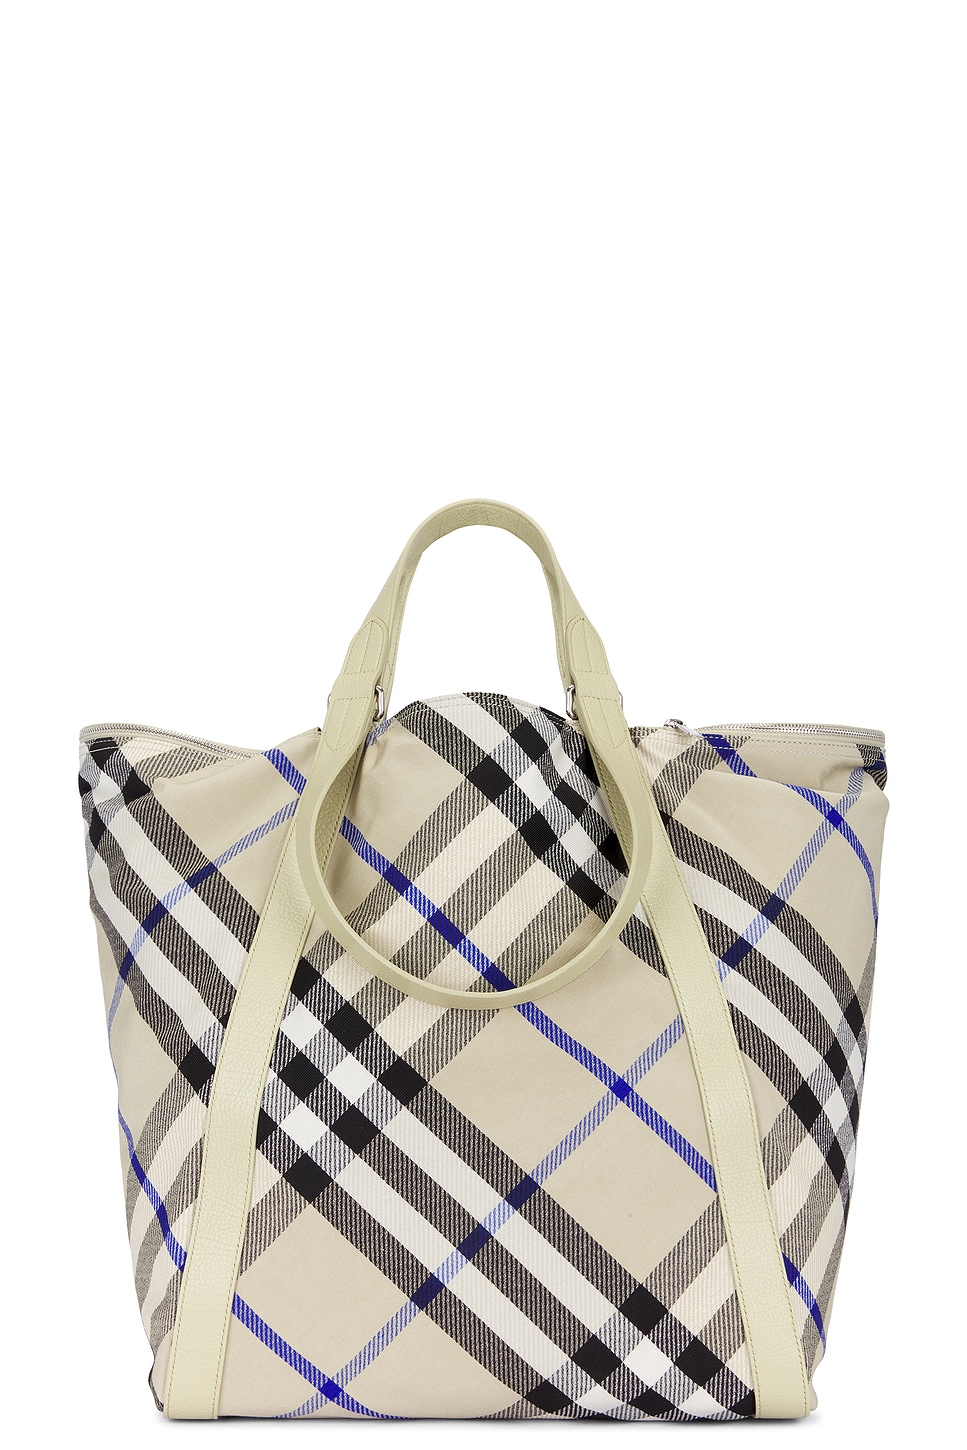 Tote Bag in Nude